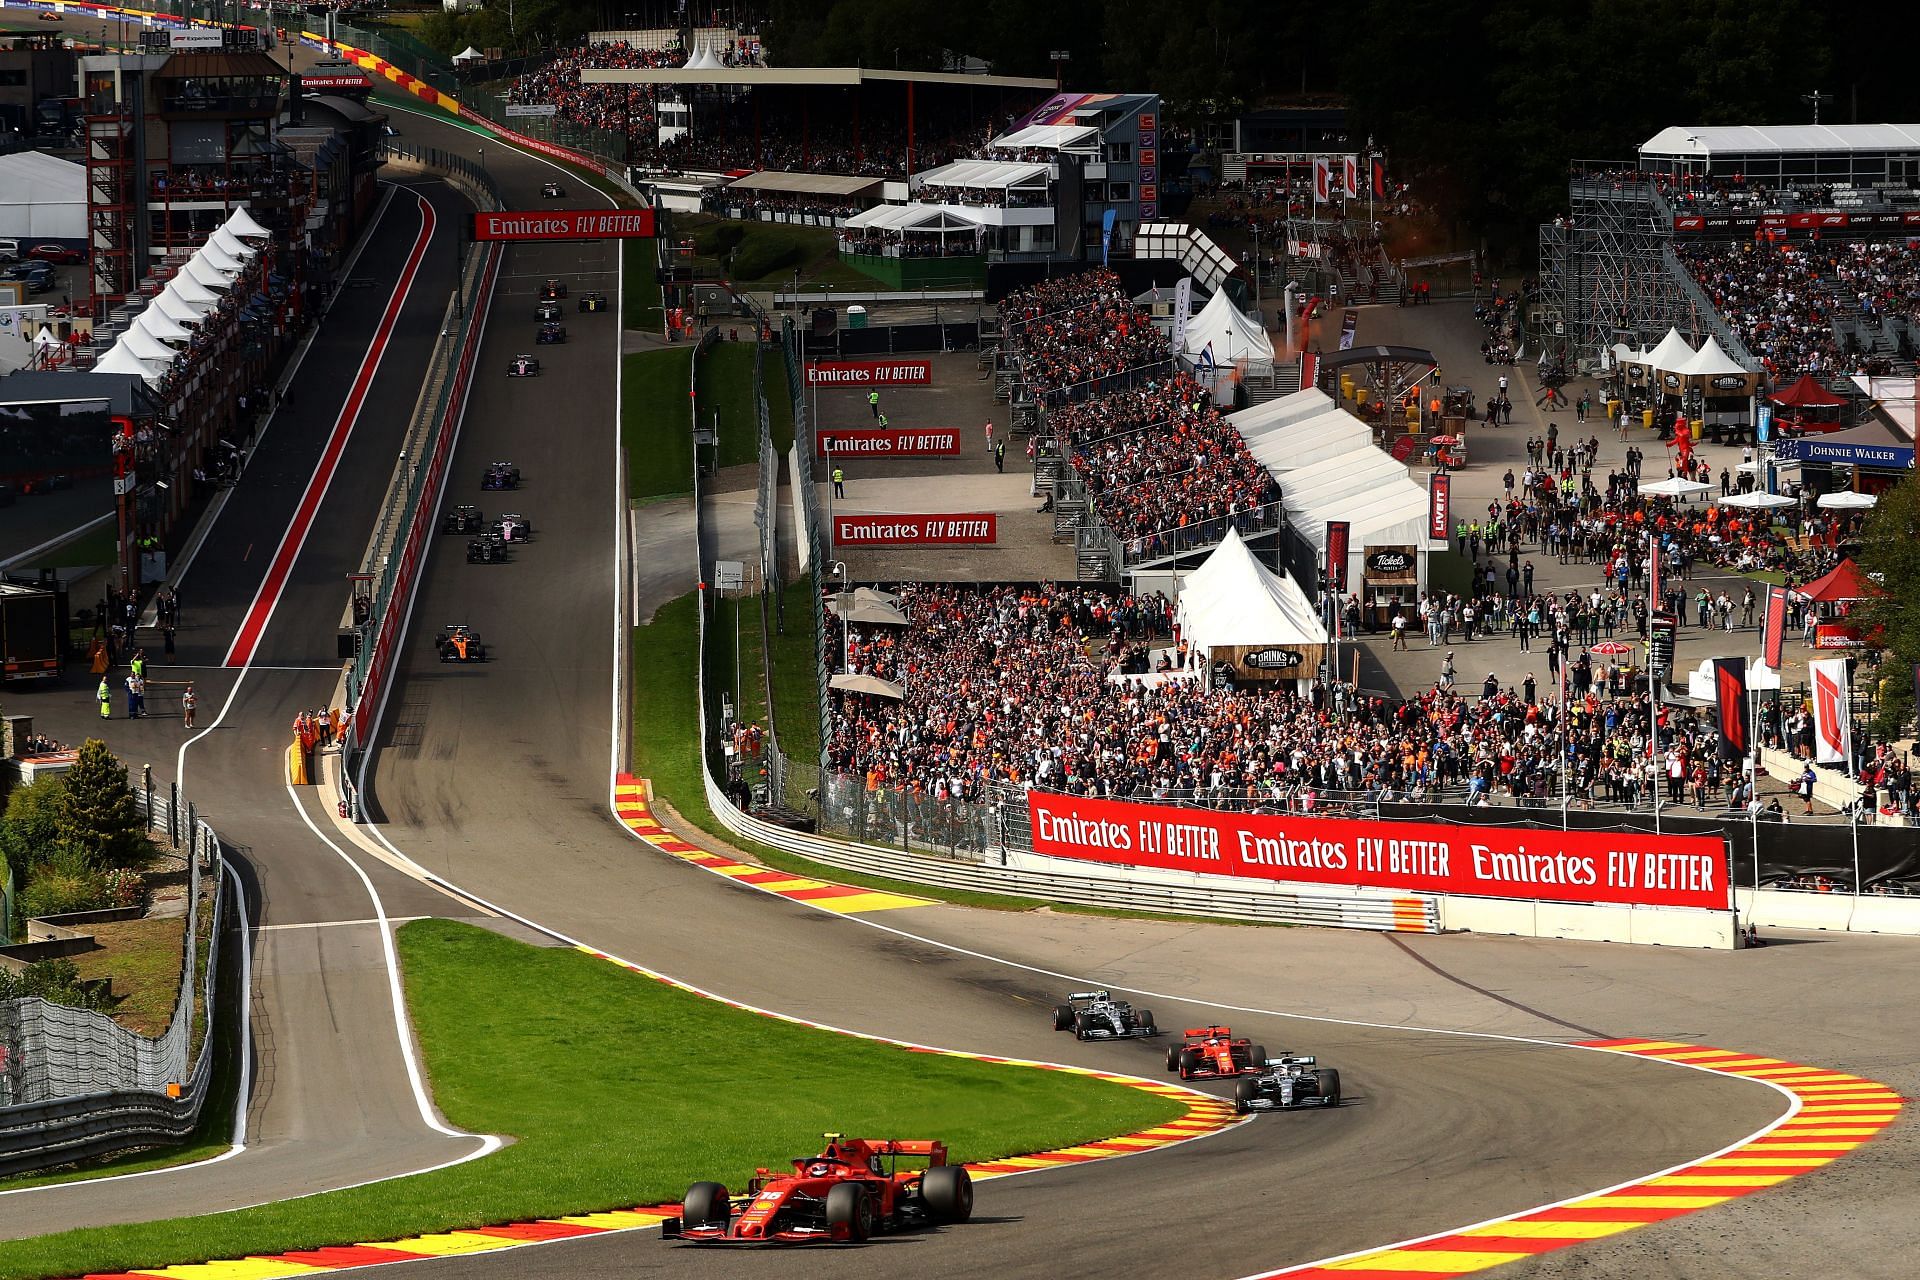 F1 Grand Prix of Belgium - The infamous Eau Rouge section